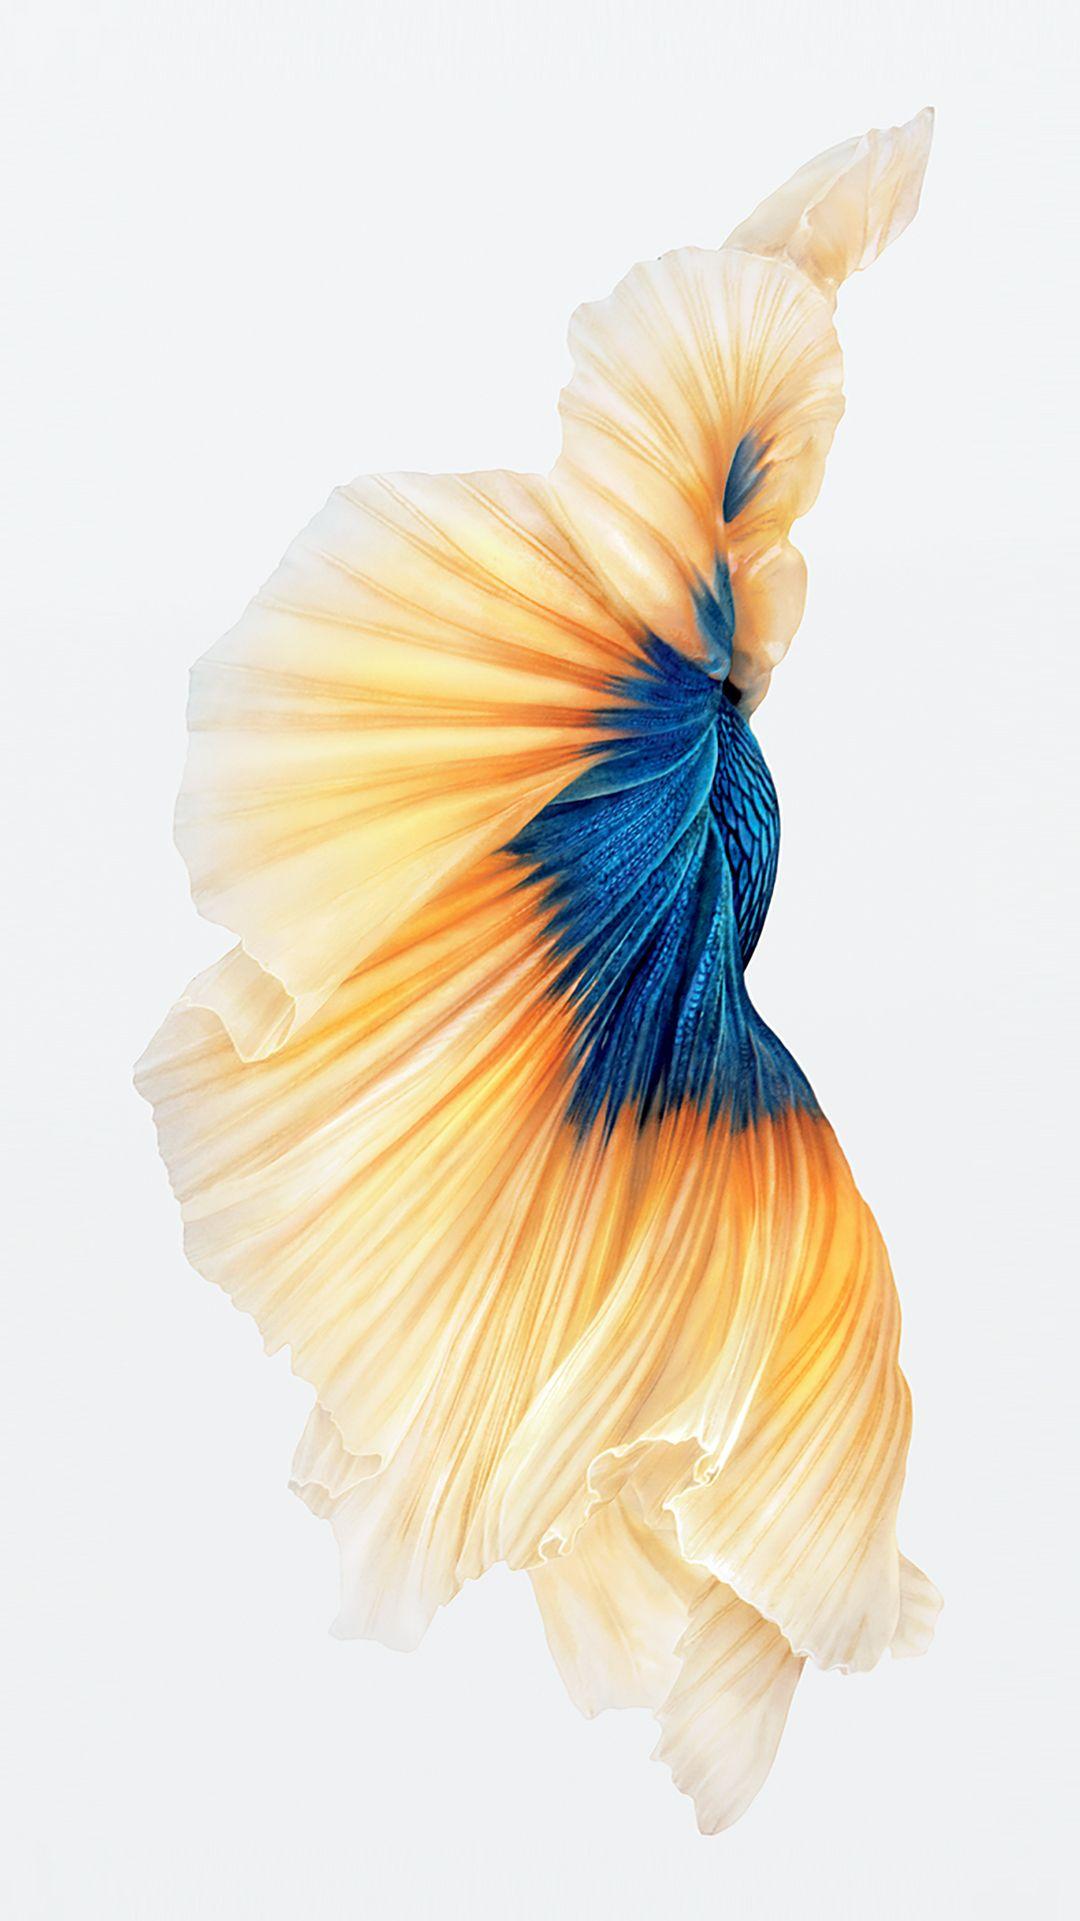 IPhone 6s Silver Blue Fish Wallpaper.png (1080×1921). IPHONE